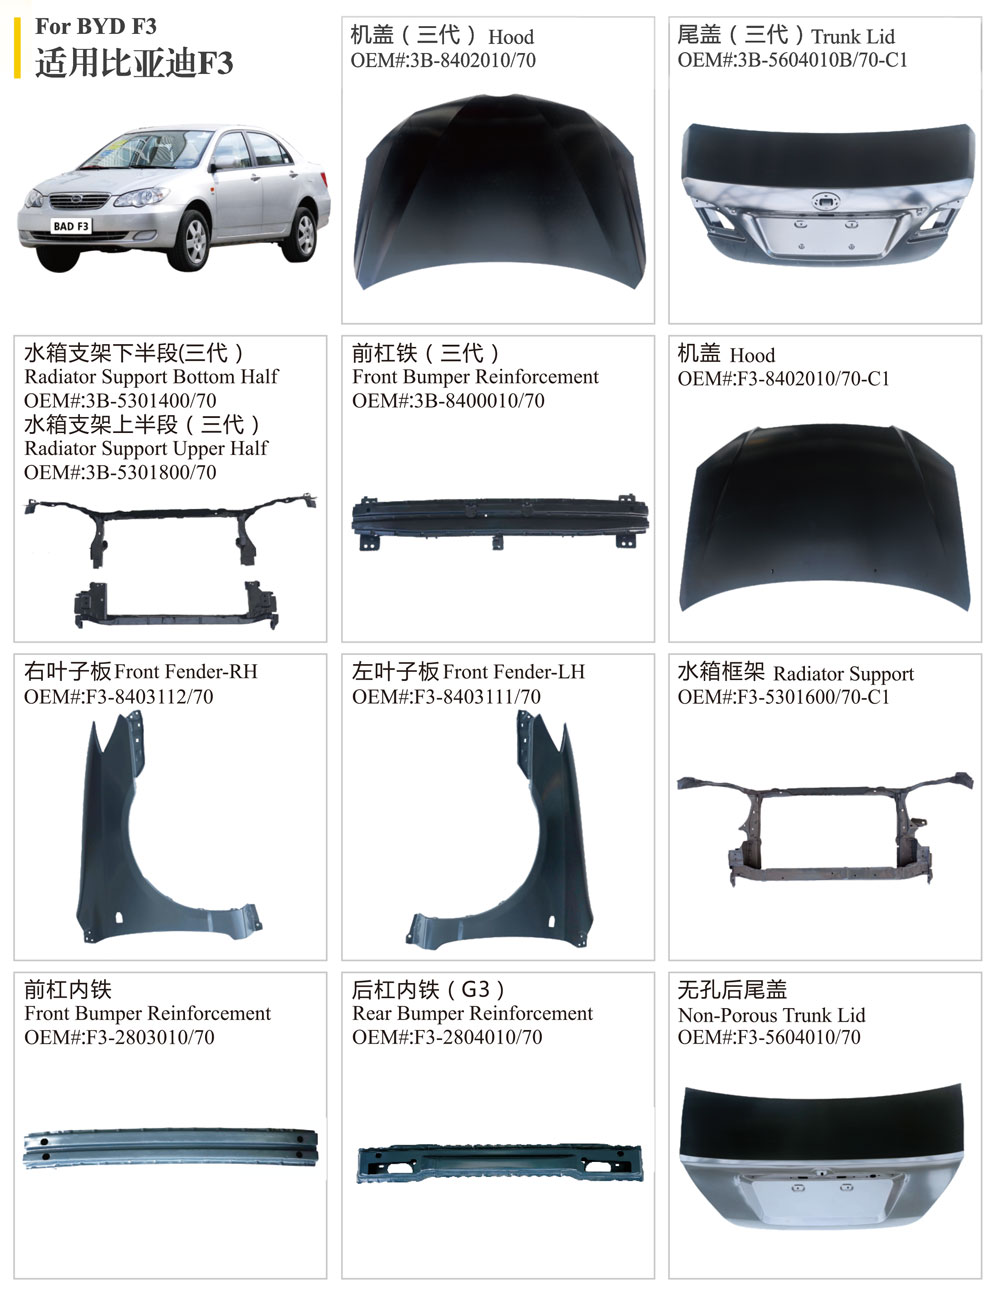 Auto Body Parts for Byd F3